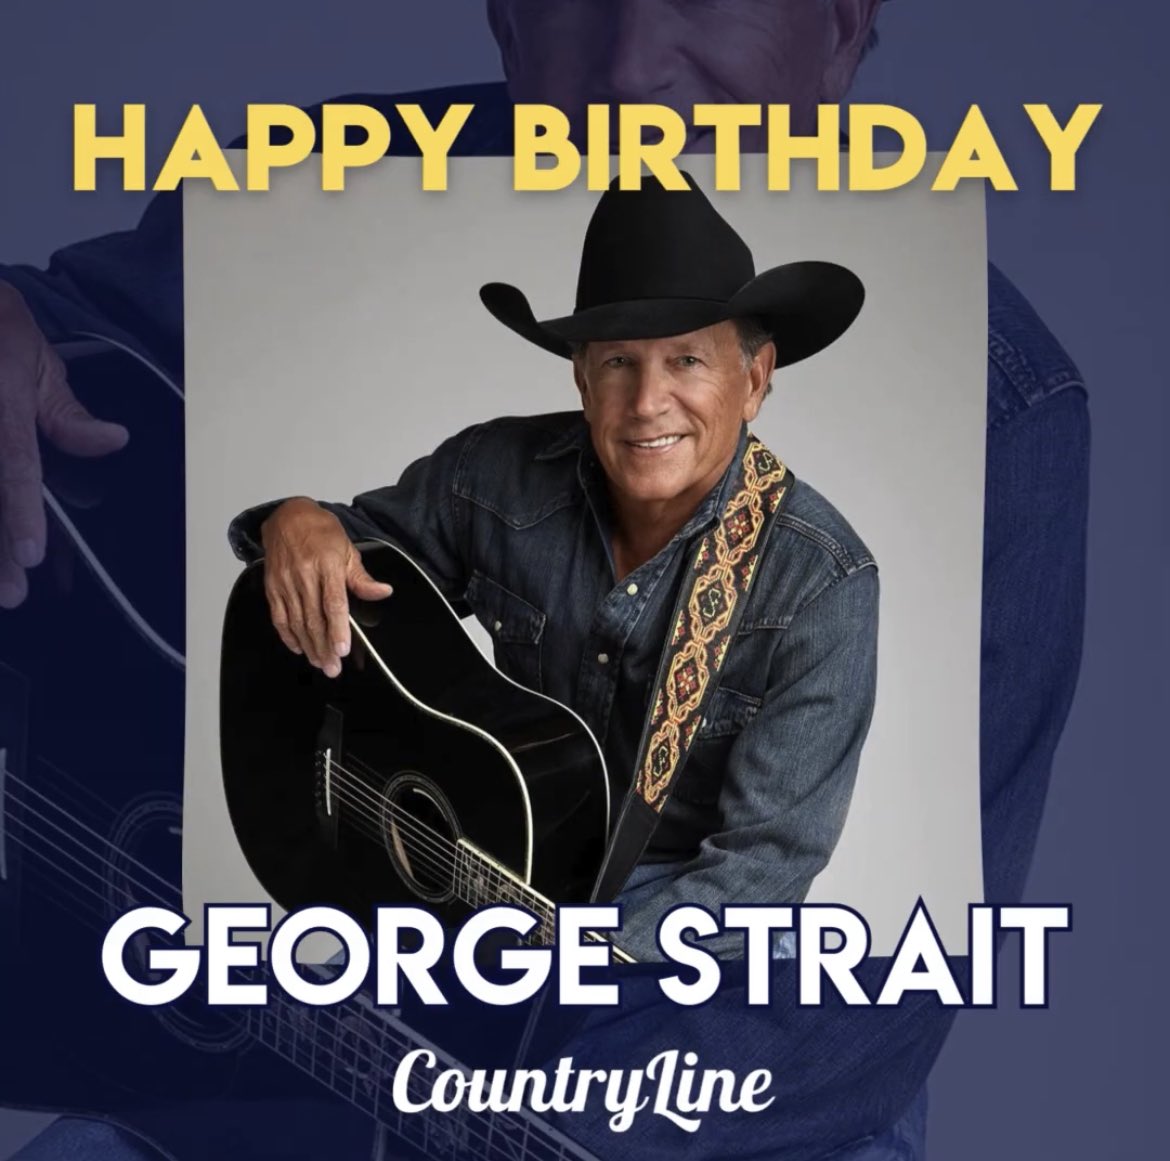 Happy birthday to the one and only @GeorgeStrait! 🎉